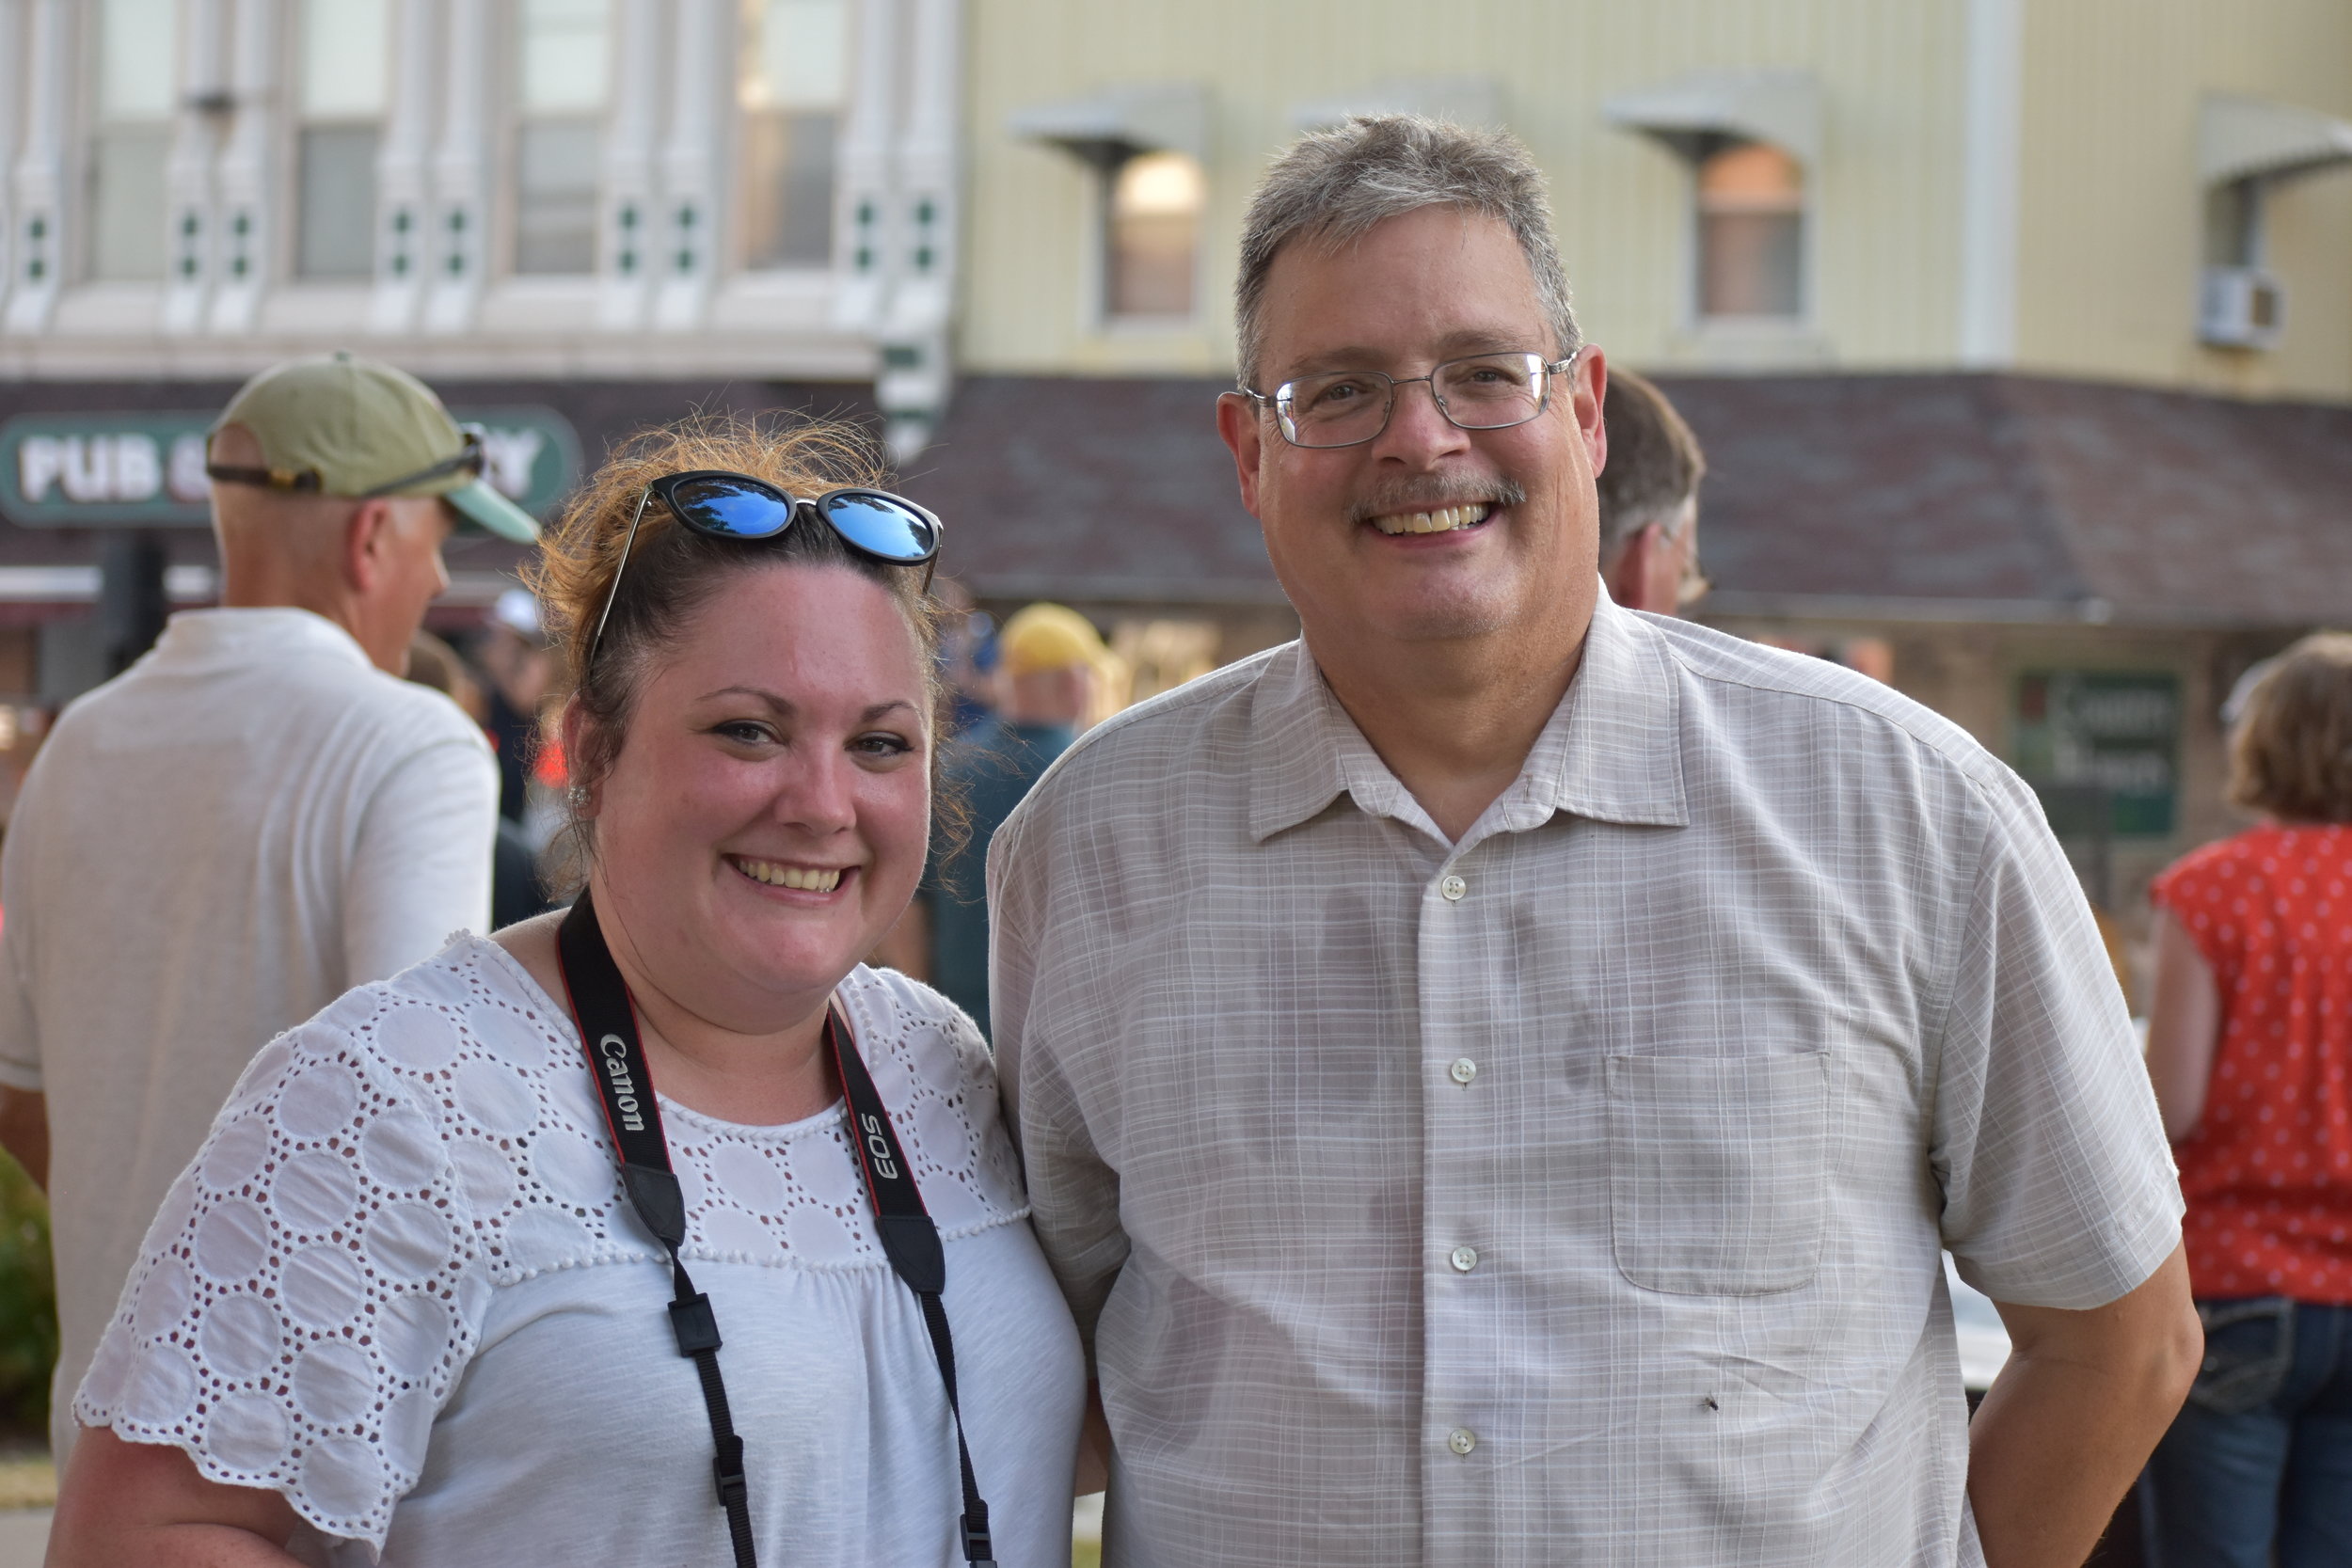  Lancaster Area Chamber of Commerce’s Executive Director Heather Bontreger and Director Rick Sanson 